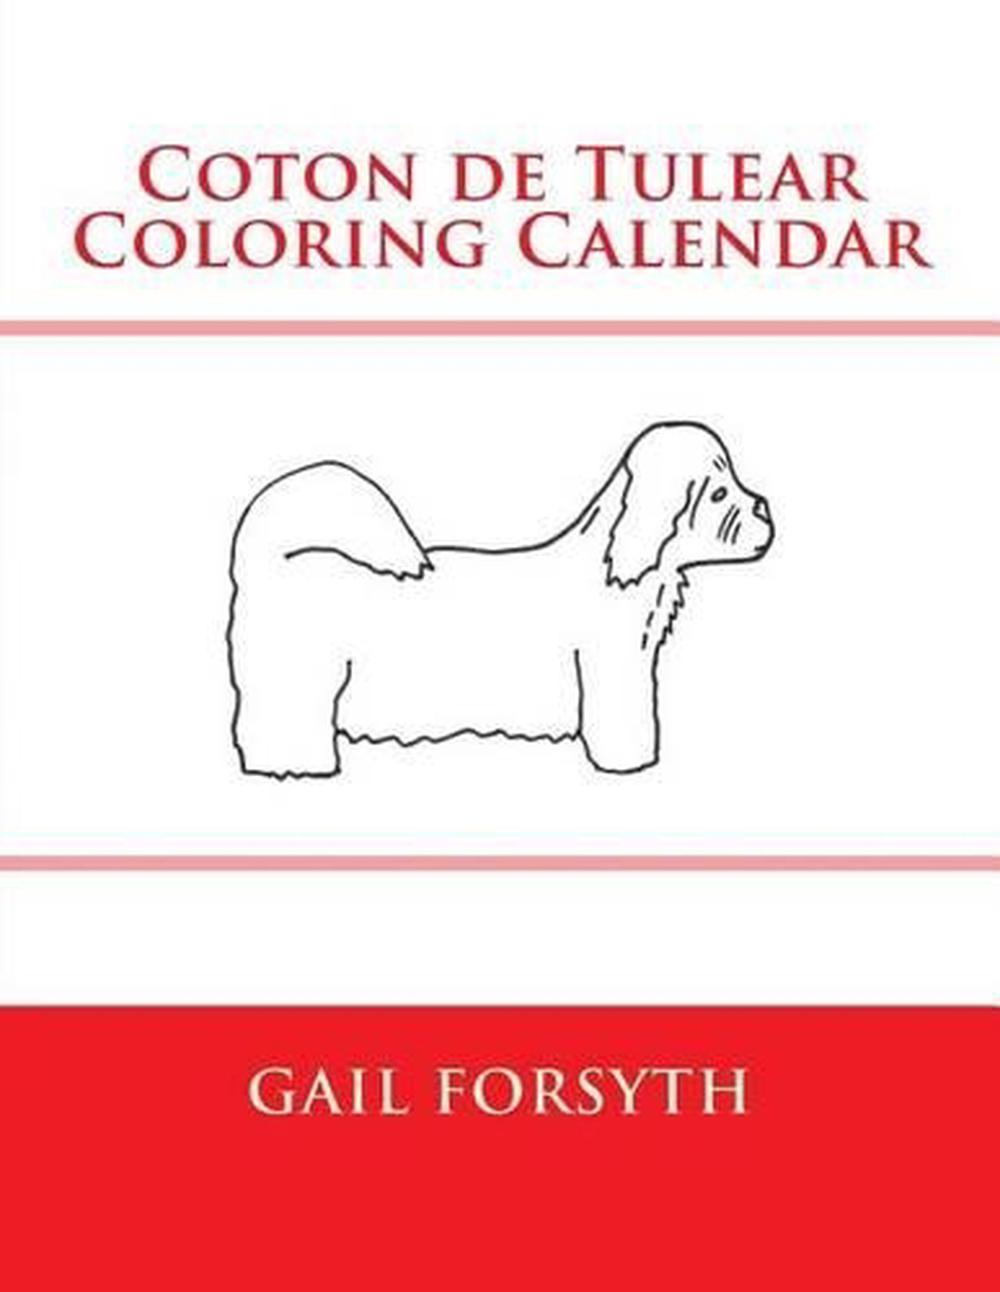 Download Coton de Tulear Coloring Calendar by Gail Forsyth (English) Paperback Book Free 9781511493857 | eBay